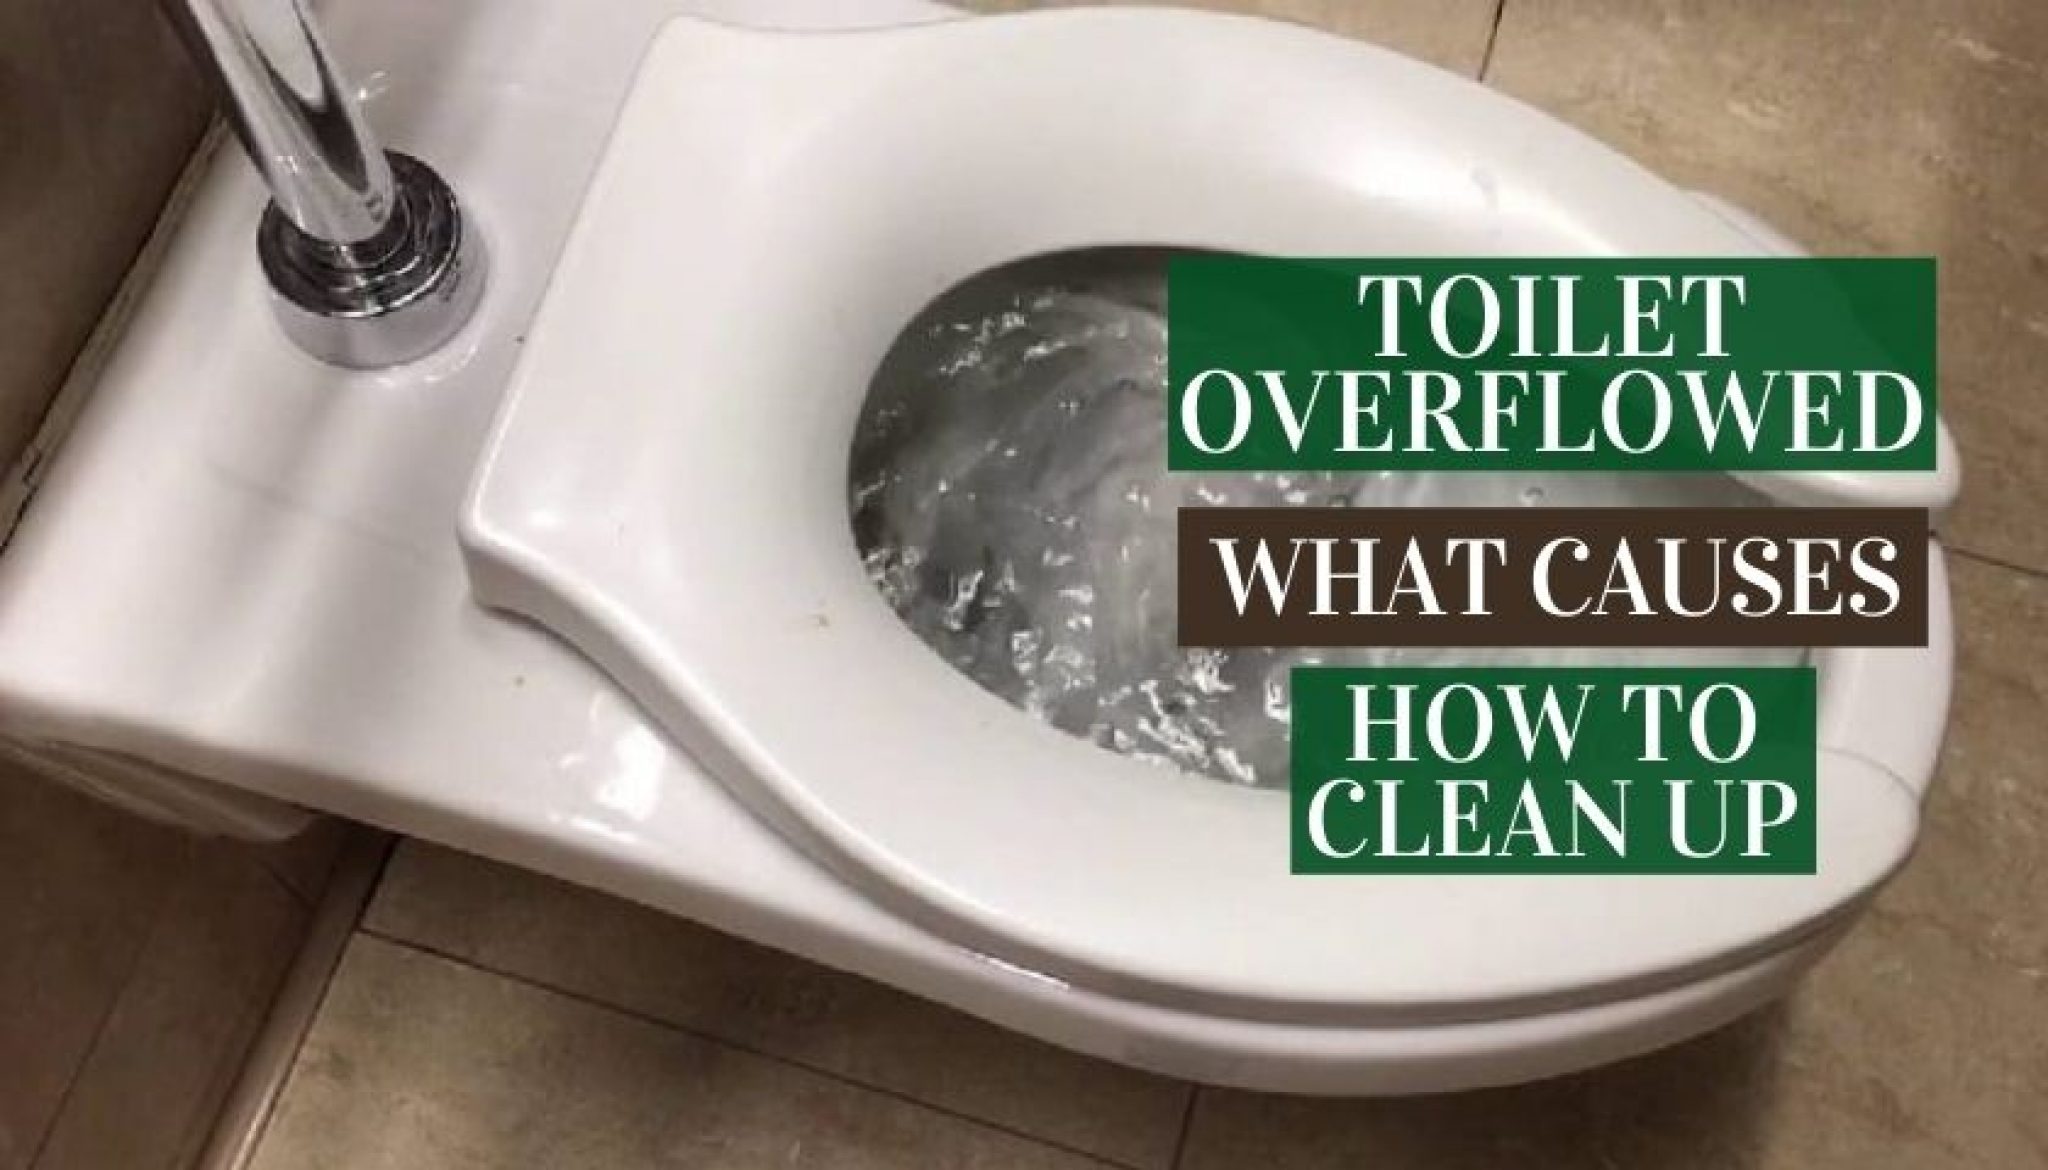 Toilet Overflowed | What Causes & How to Clean Up My Toilet Overflowed And Now My Carpet Smells